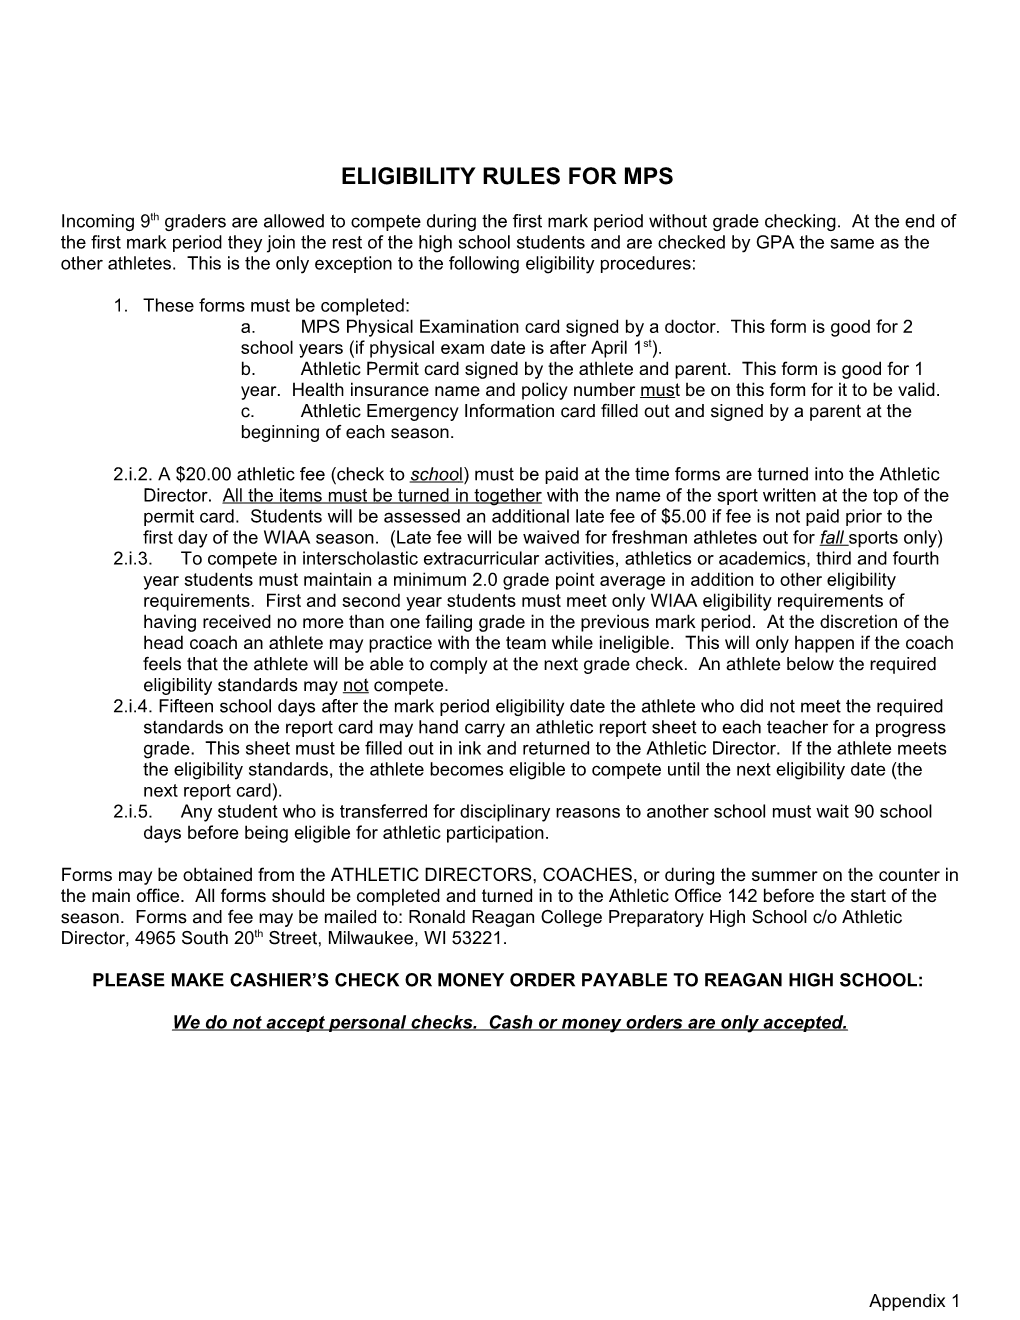 Eligibility Rules for Mps